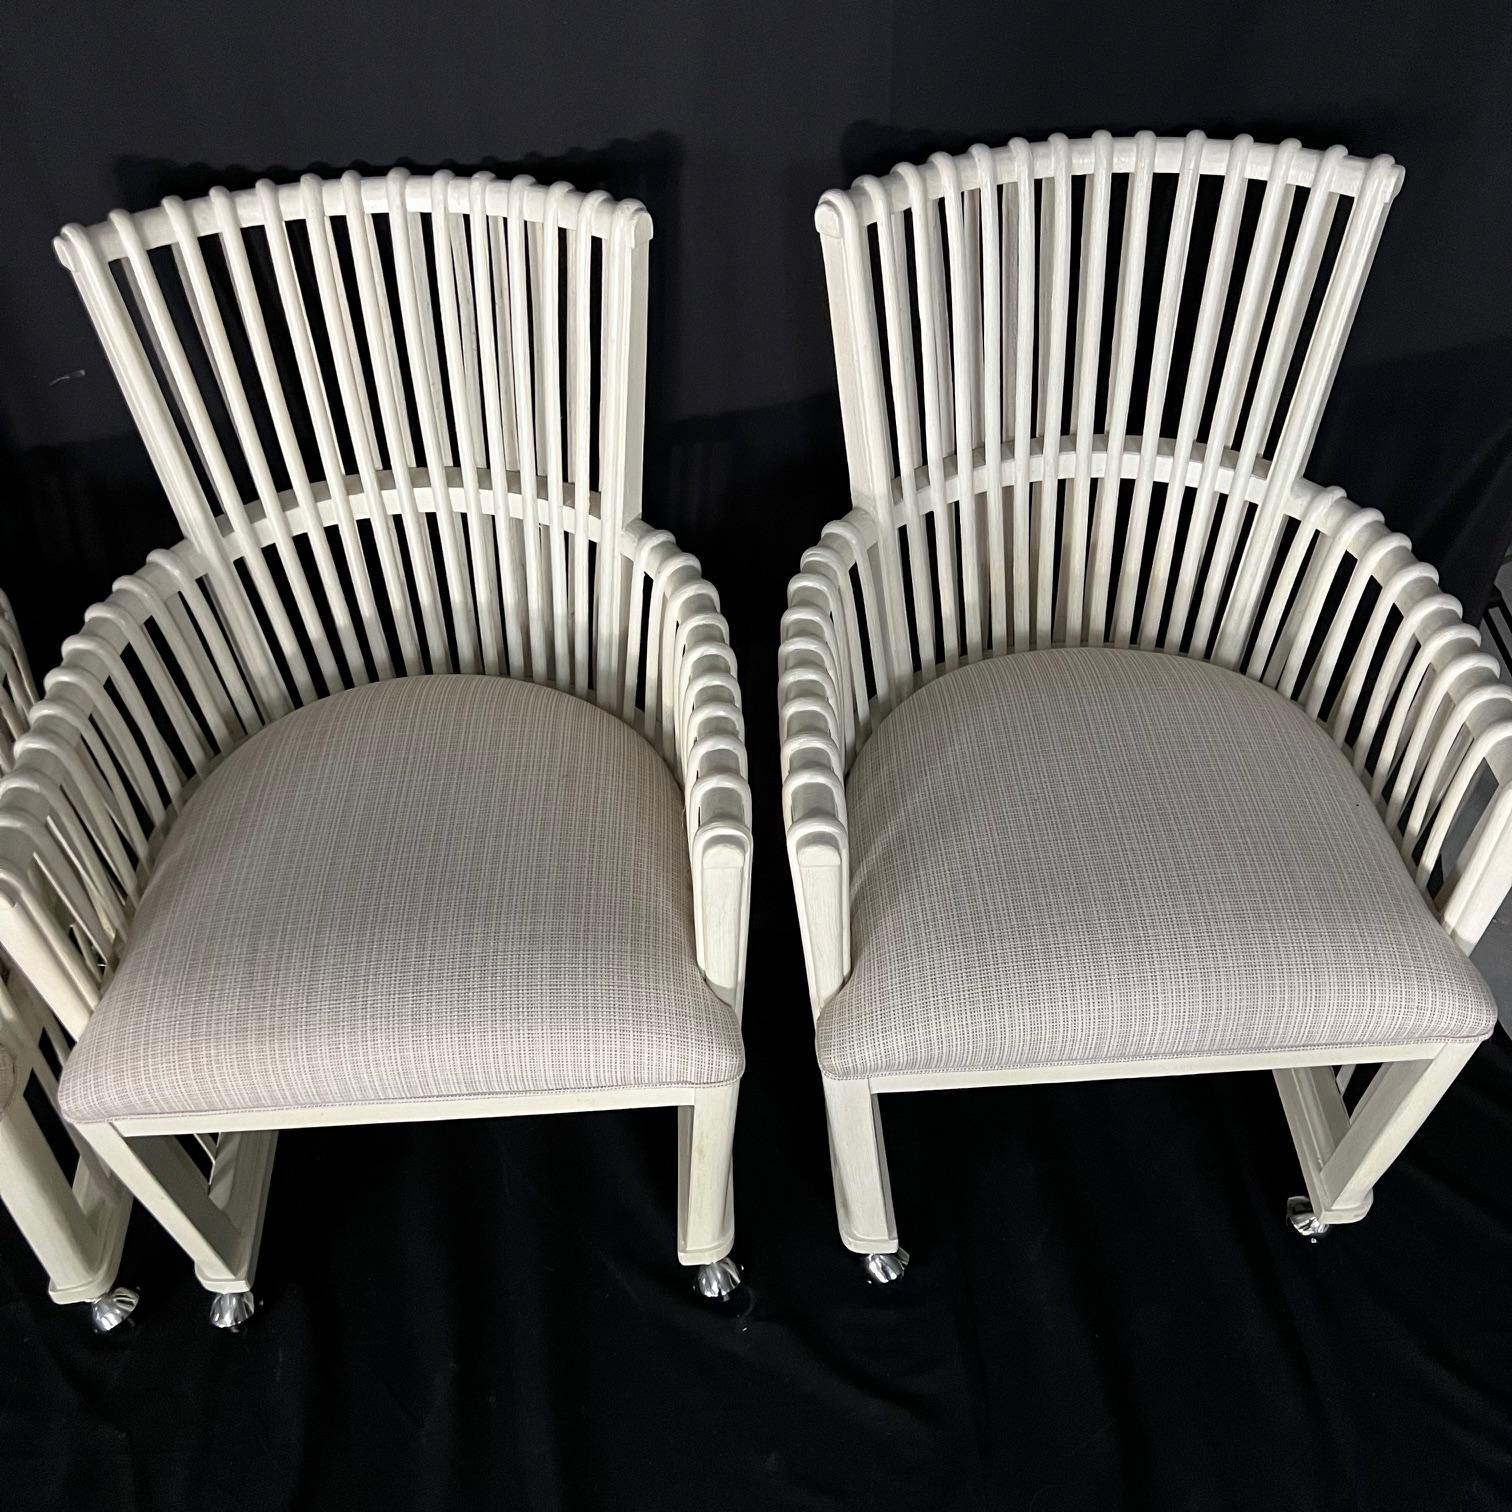 Indonesian Set of Four White Bent Rattan Dining or Club Chairs with Casters